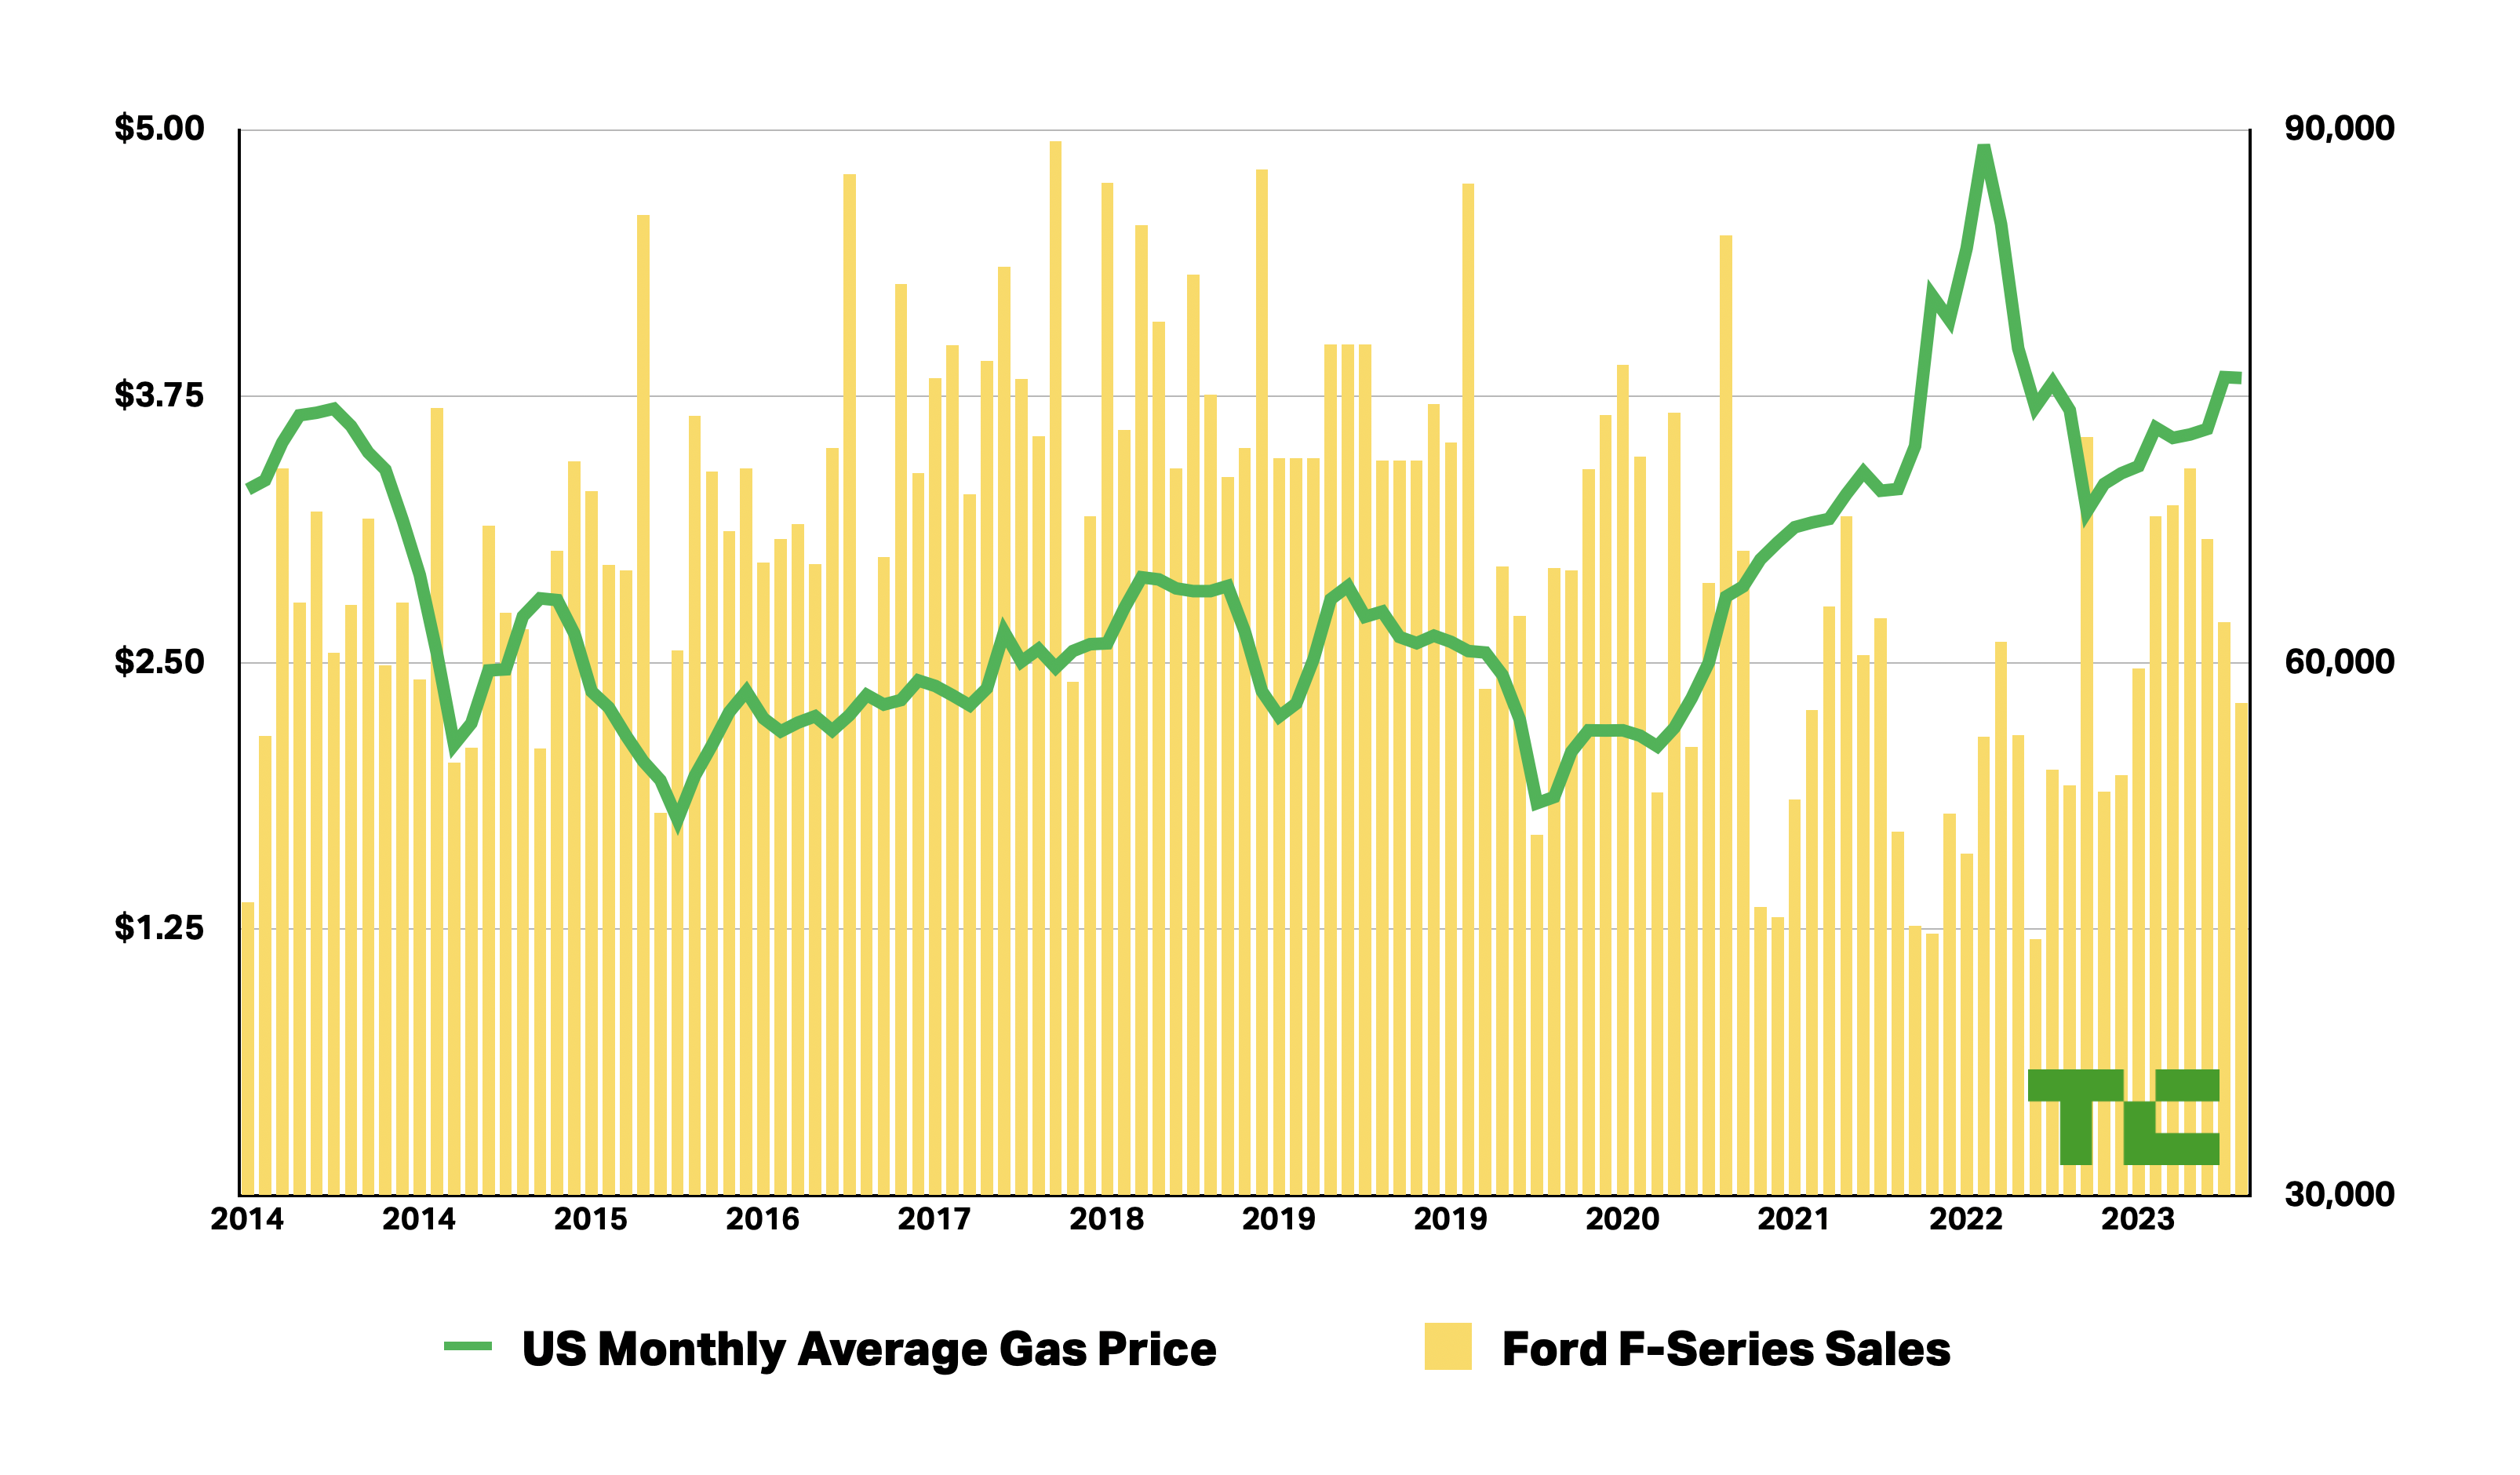 Ford F-Series sales were compared to U.S. gasoline prices between 2014 and 2023.